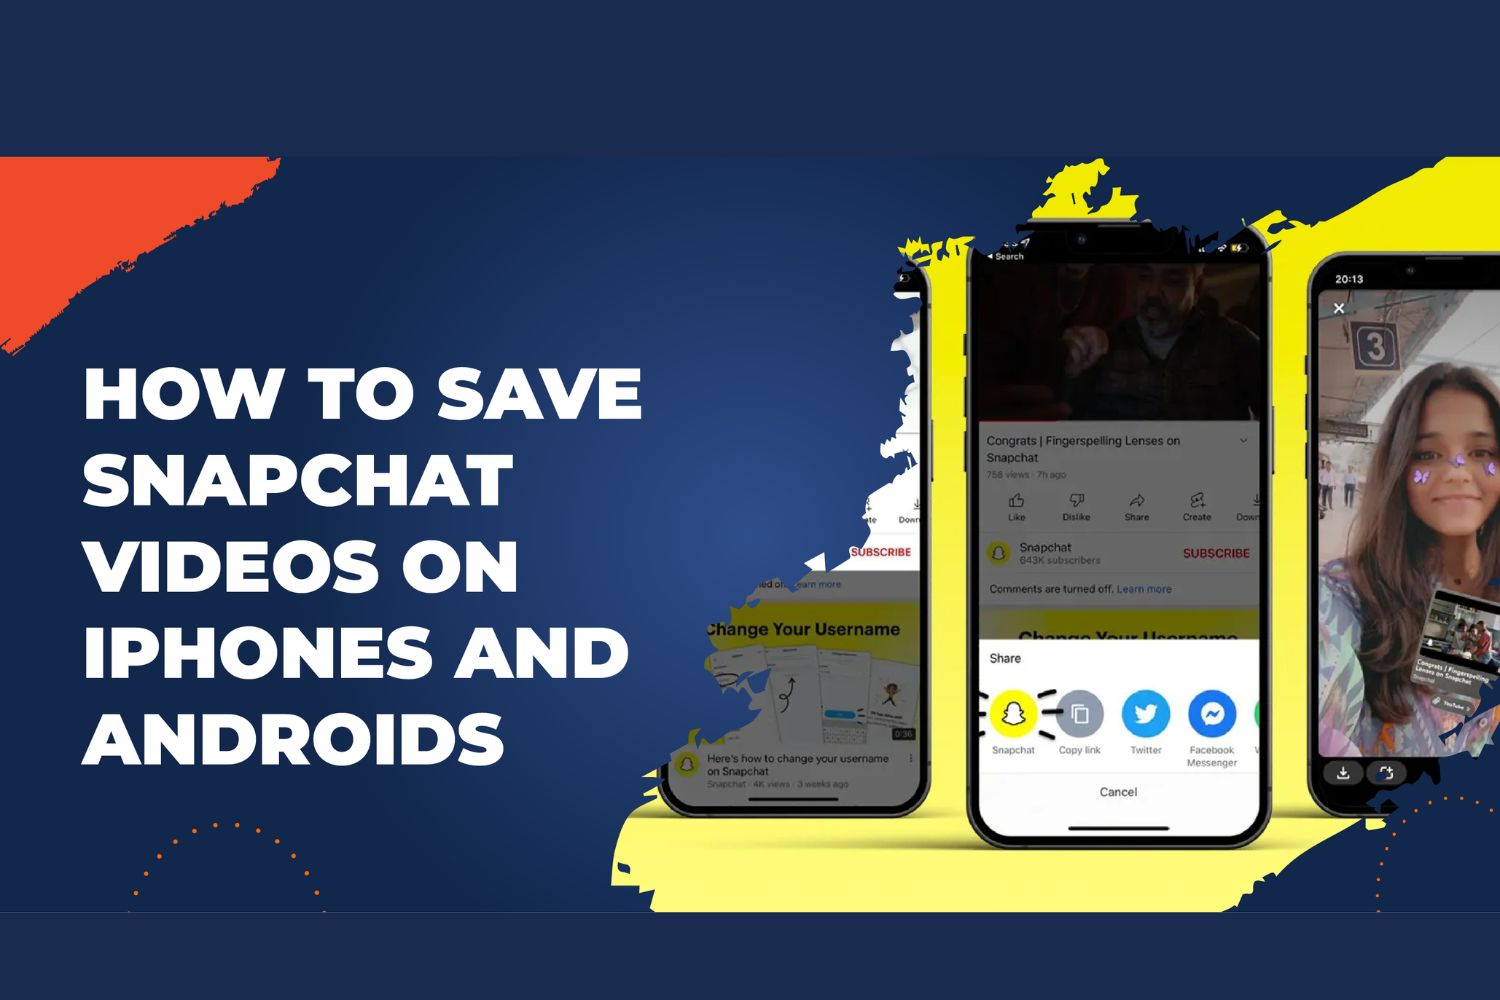 How to Save Snapchat Videos on iPhones and Androids